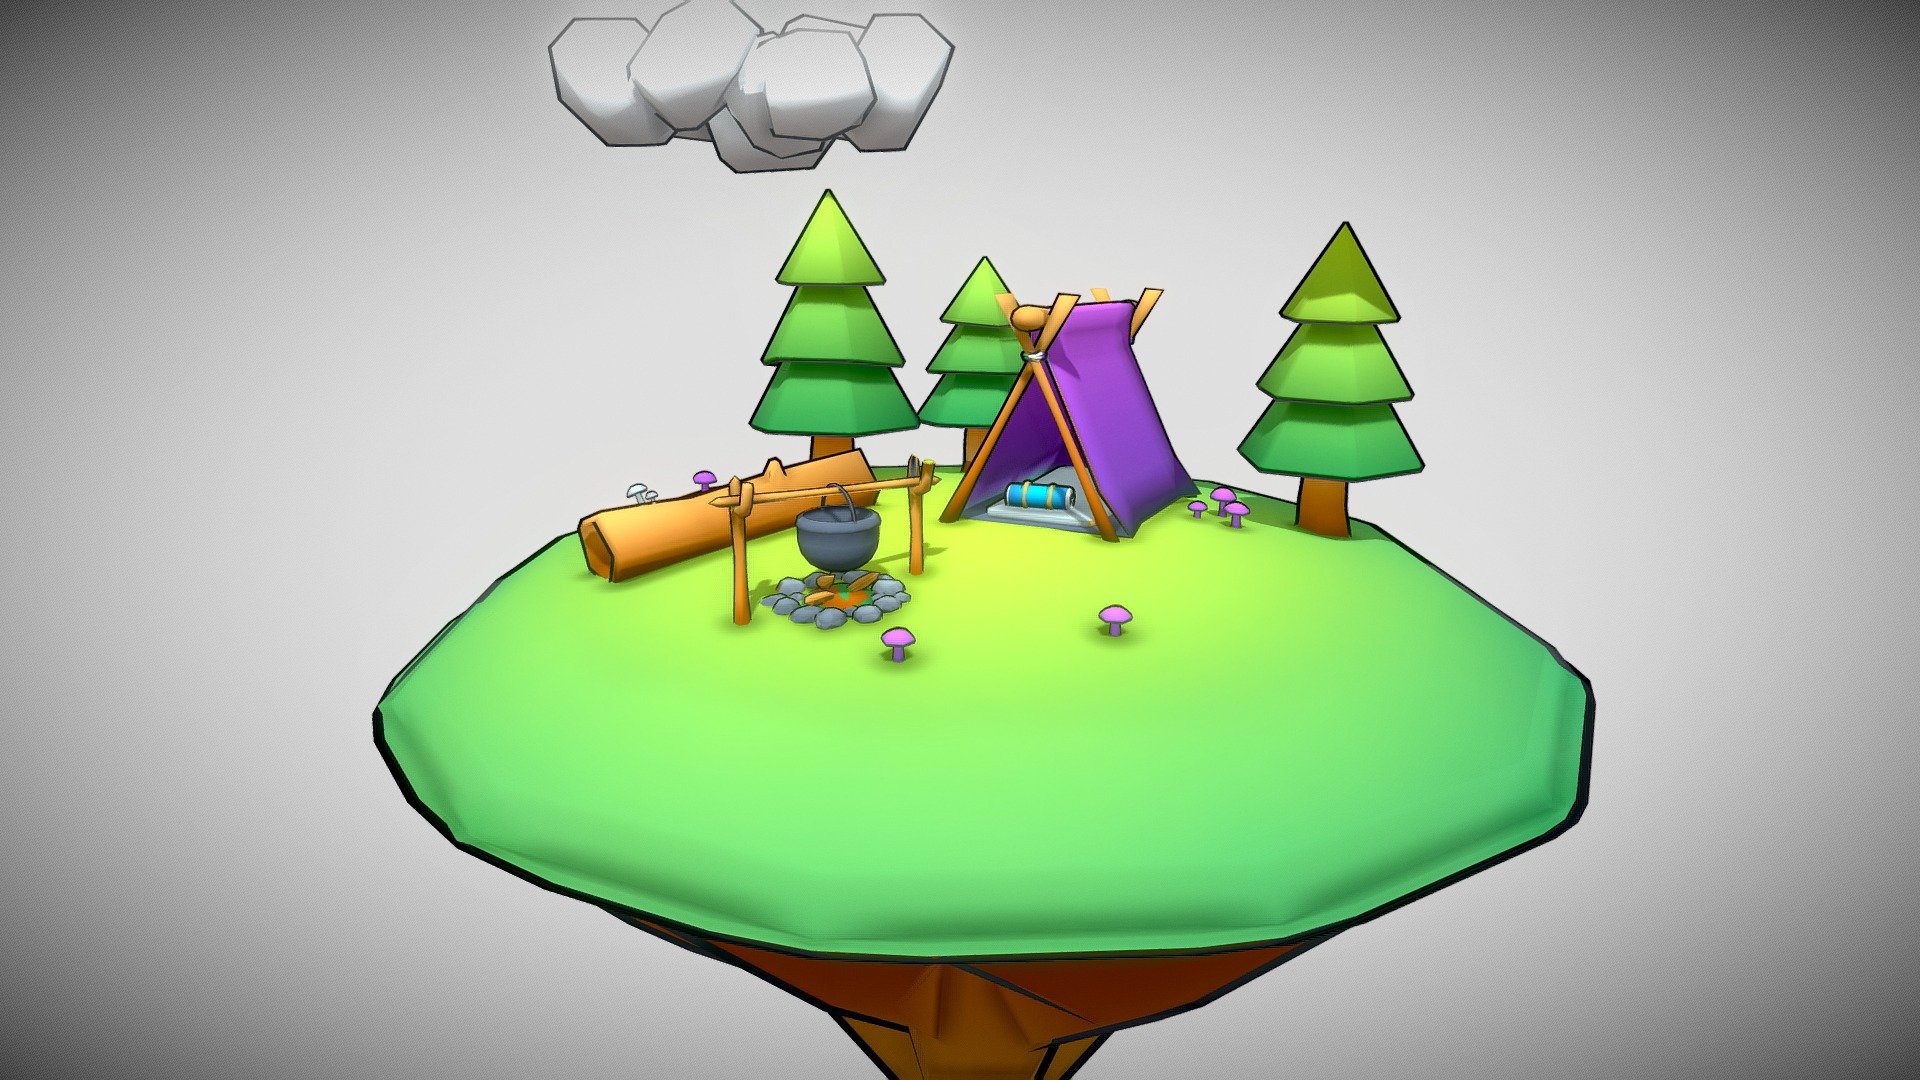 Simple stylized scene made with Blender 2.93 LTS.
This is a low poly cartoon floating island with a tent and fire camp.
I added outline to objects to get toon effect.
I used a gradient texture on objects to get this nice render.

I started to create a little planet but the result was not as good as expected so I decided to create a tiny low poly island (very simple) and put my scene on it. I added low poly clouds to complete the decoration.

Il this scene you can see:
* Low poly tent
* Pines
* Rocks
* Firecamp
* Trunk
* Mushrooms
* Clouds
* Floating island

Don't hesitate to share your ideas to improve this low poly scene 3d model